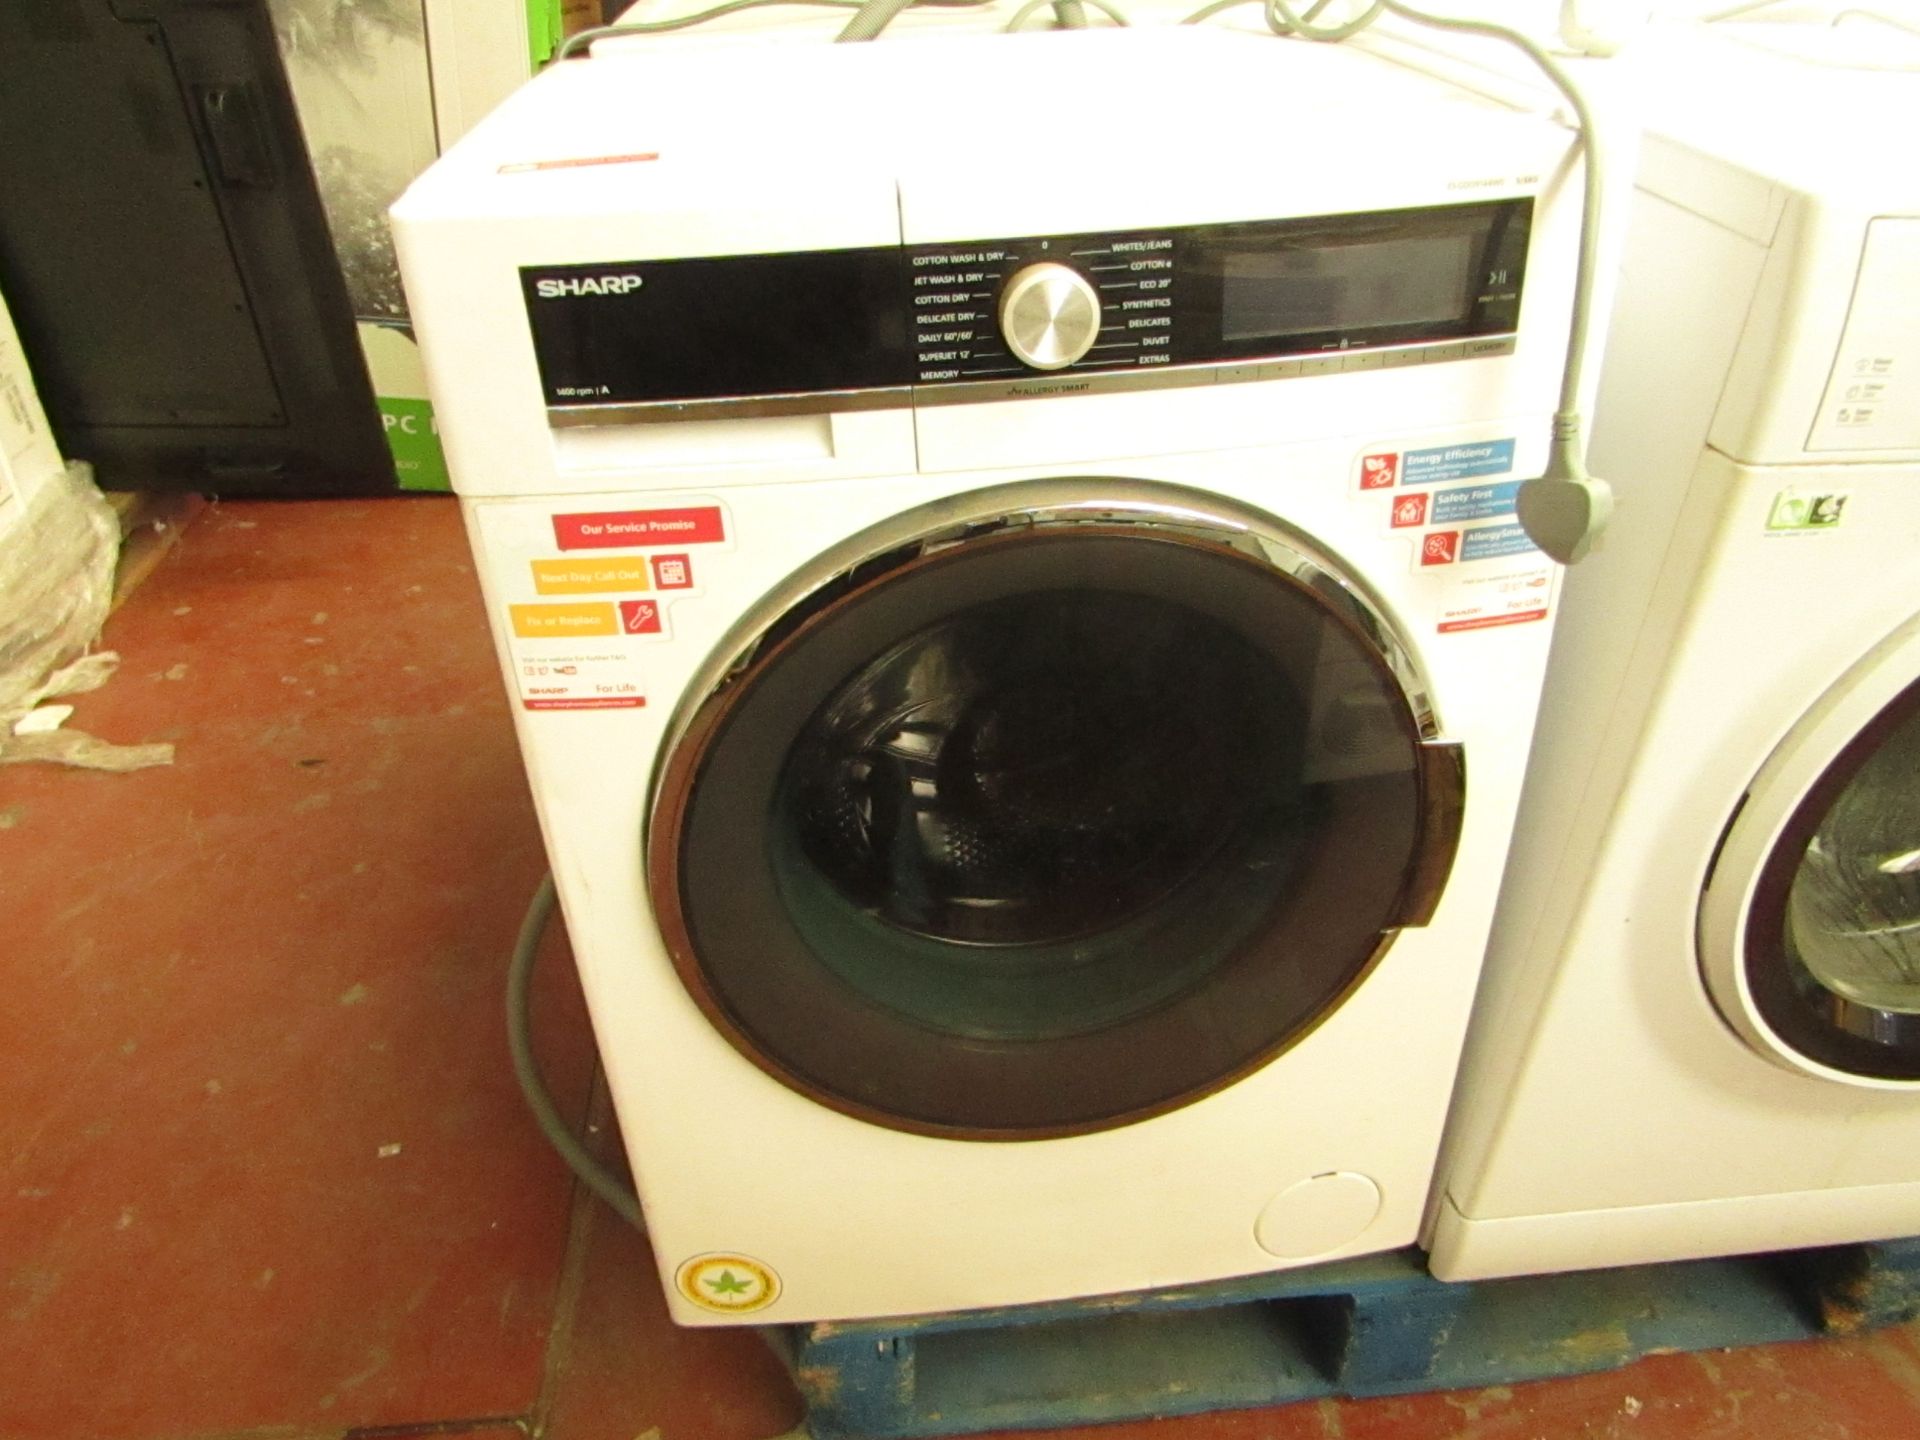 Sharp washer / dryer, 9/6Kg, powers on and no spin and door will not open so the heat is untested.